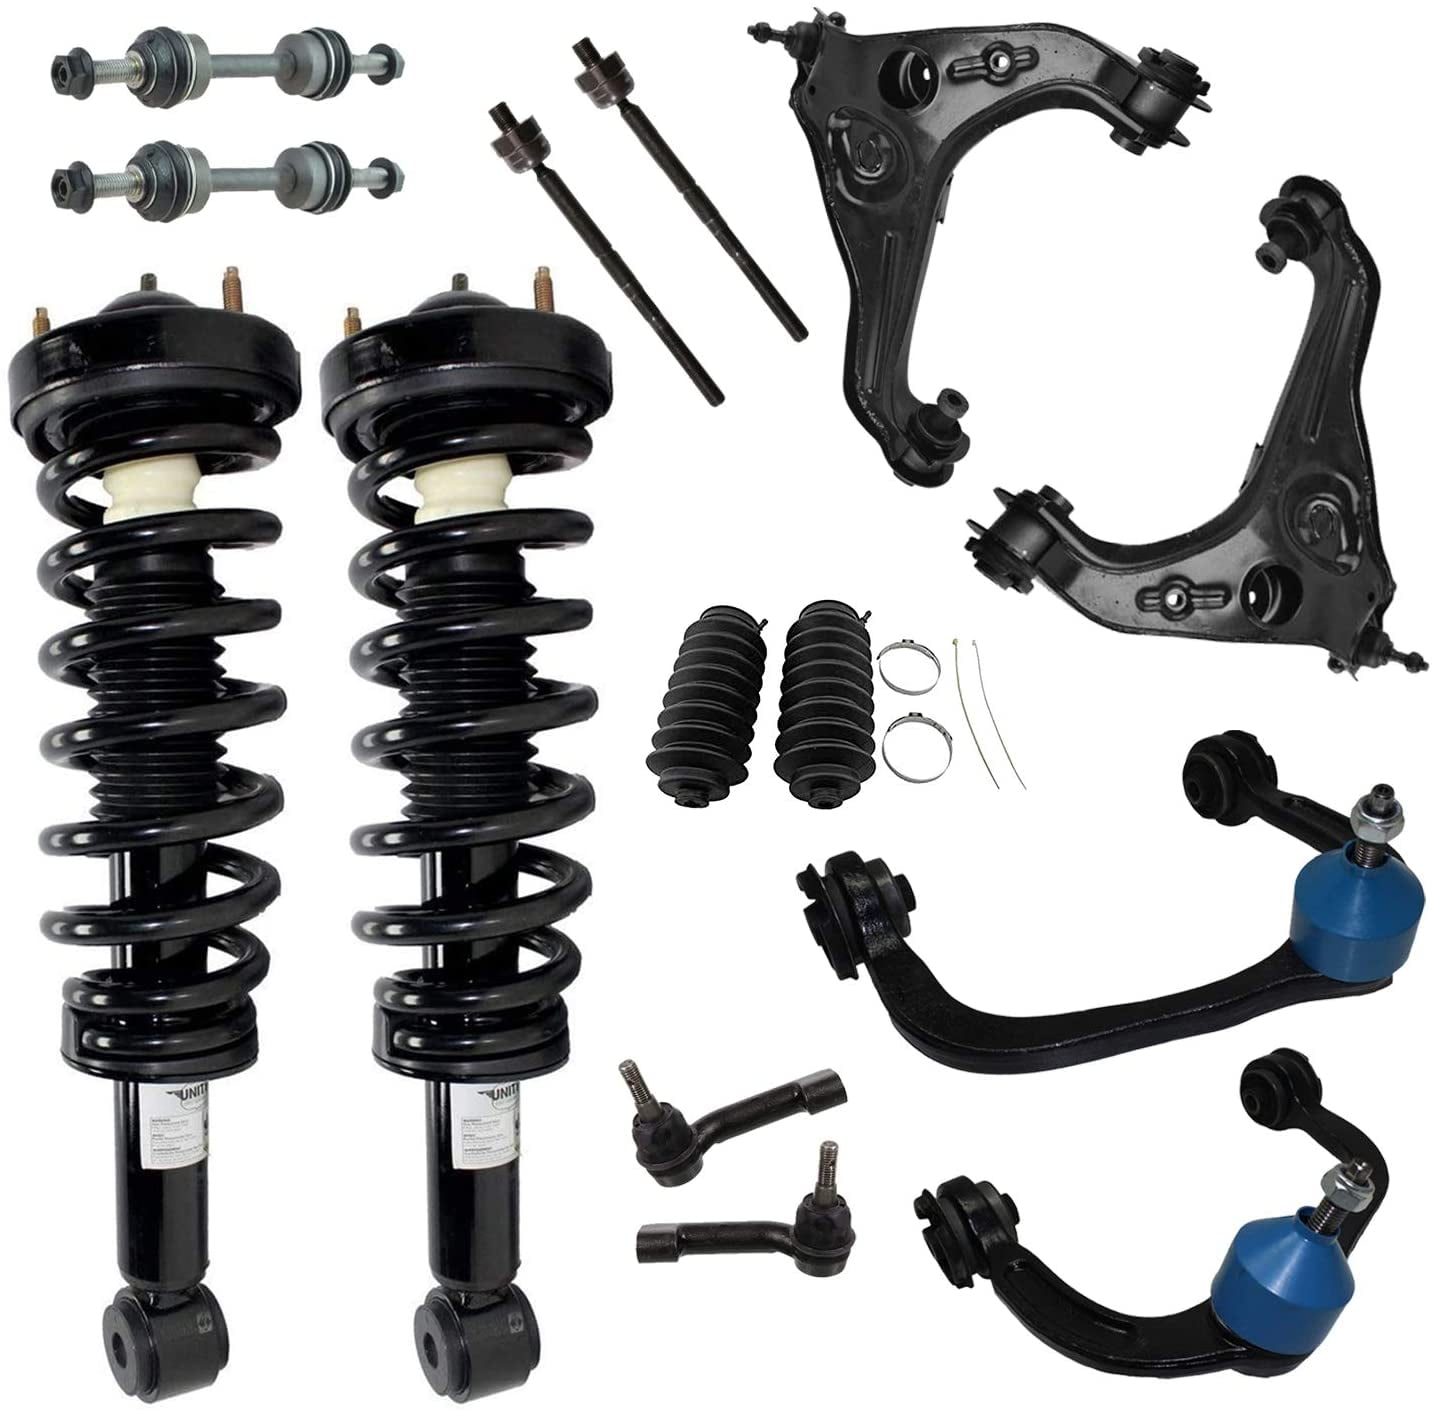 2WD Front Struts w/Coil Springs Sway Bar Links & Rear Shocks for 2009-2013 Ford F-150 2WD Detroit Axle 